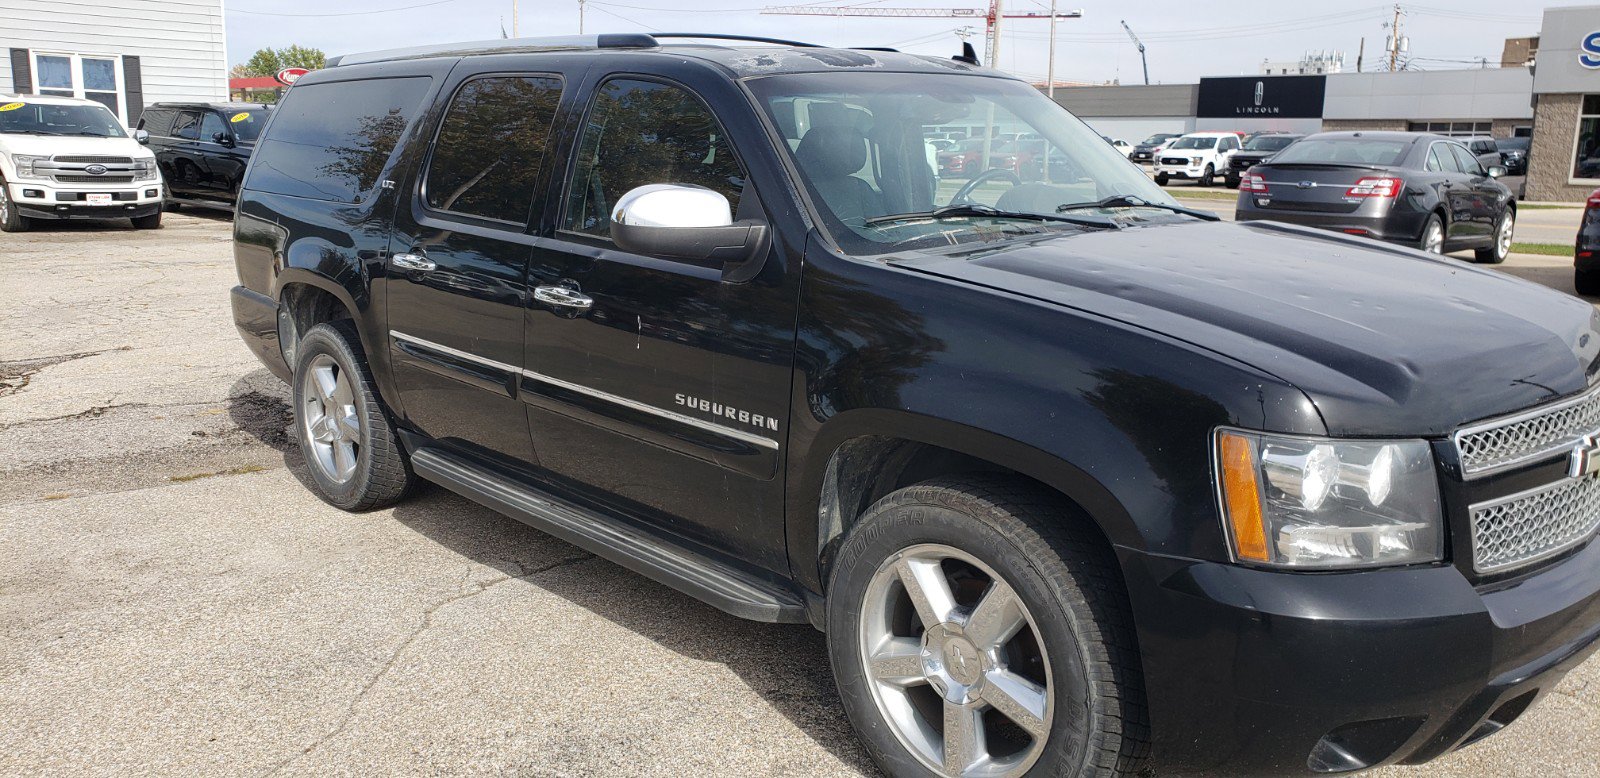 Used 2013 Chevrolet Suburban LTZ with VIN 1GNSKKE76DR198435 for sale in Grinnell, IA